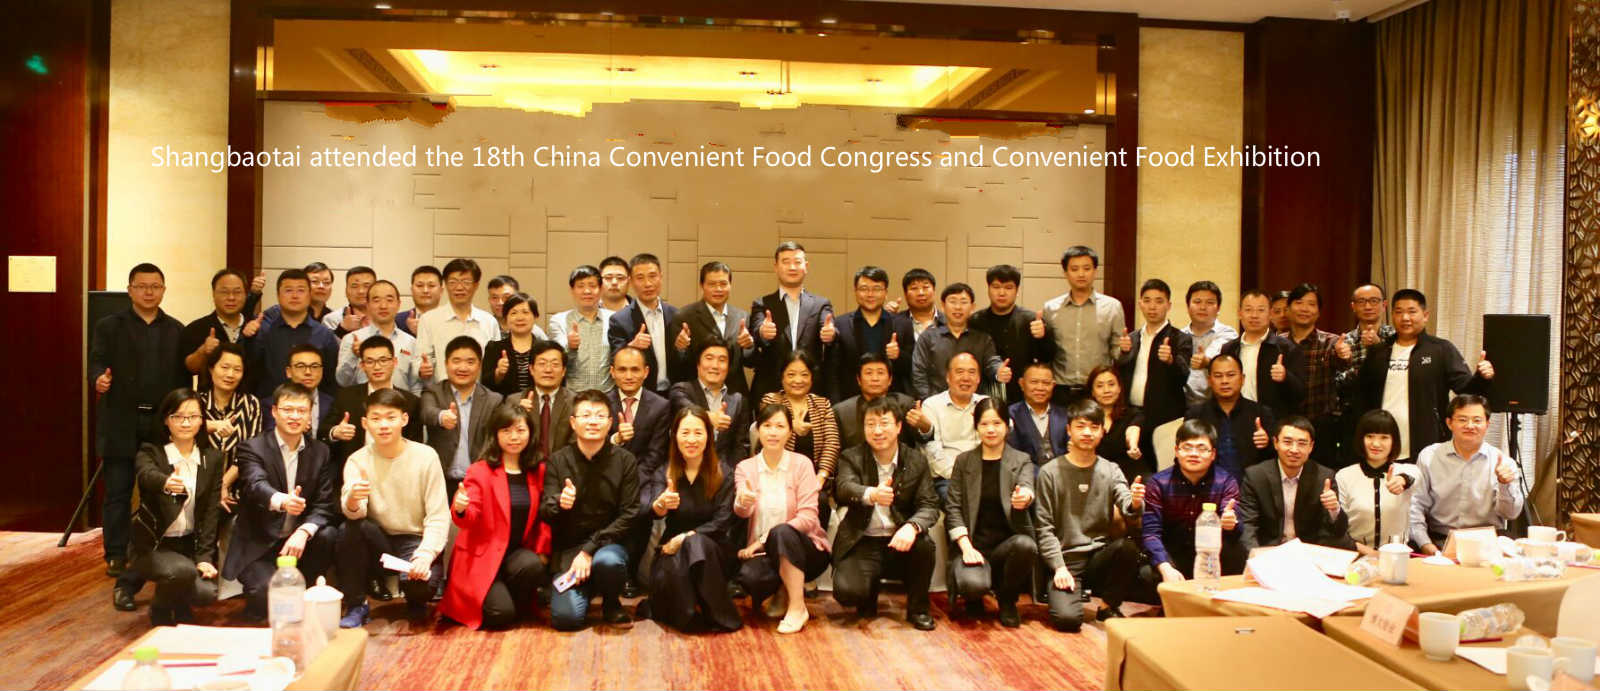 Shangbaotai attended the 18th China Convenient Food Congress and Convenient Food Exhibition